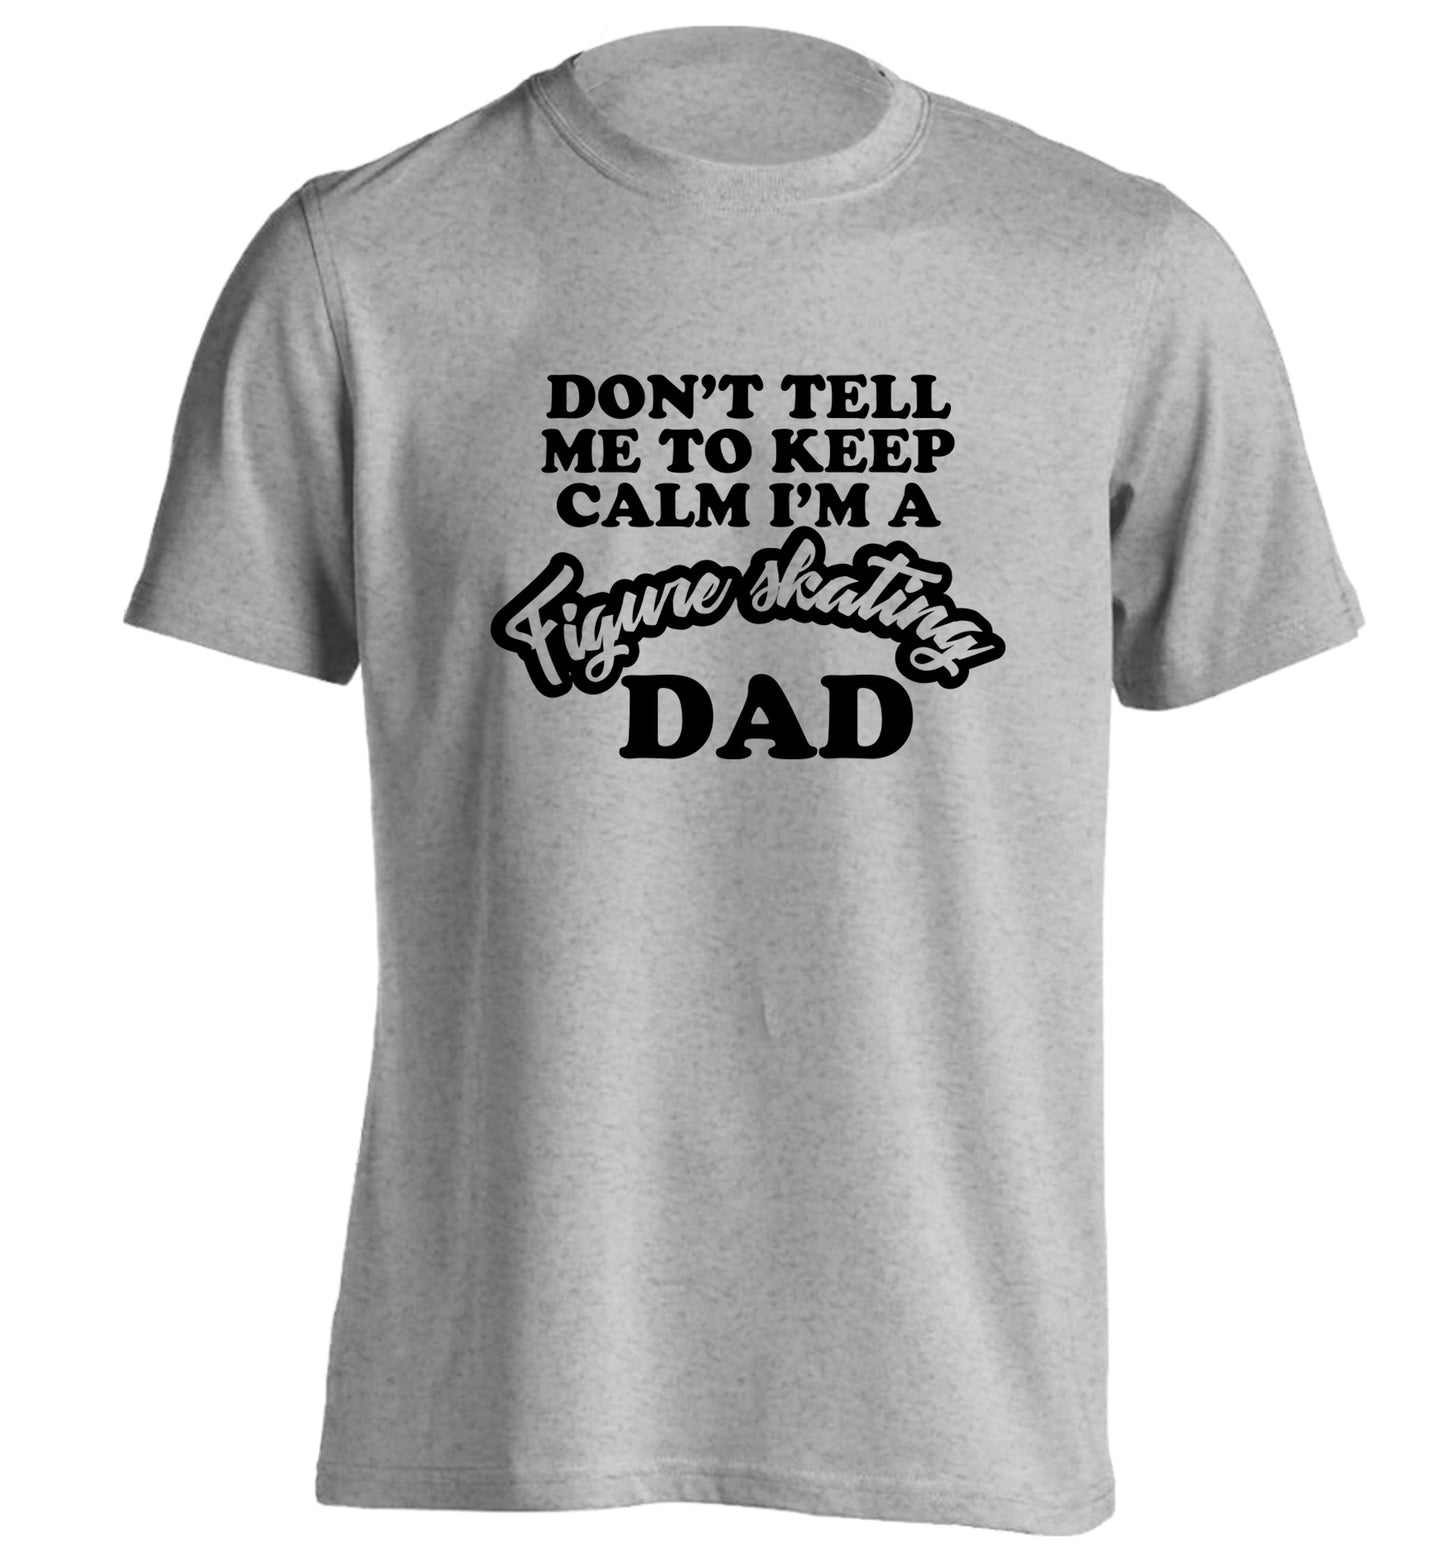 Don't tell me to keep calm I'm a figure skating dad adults unisexgrey Tshirt 2XL